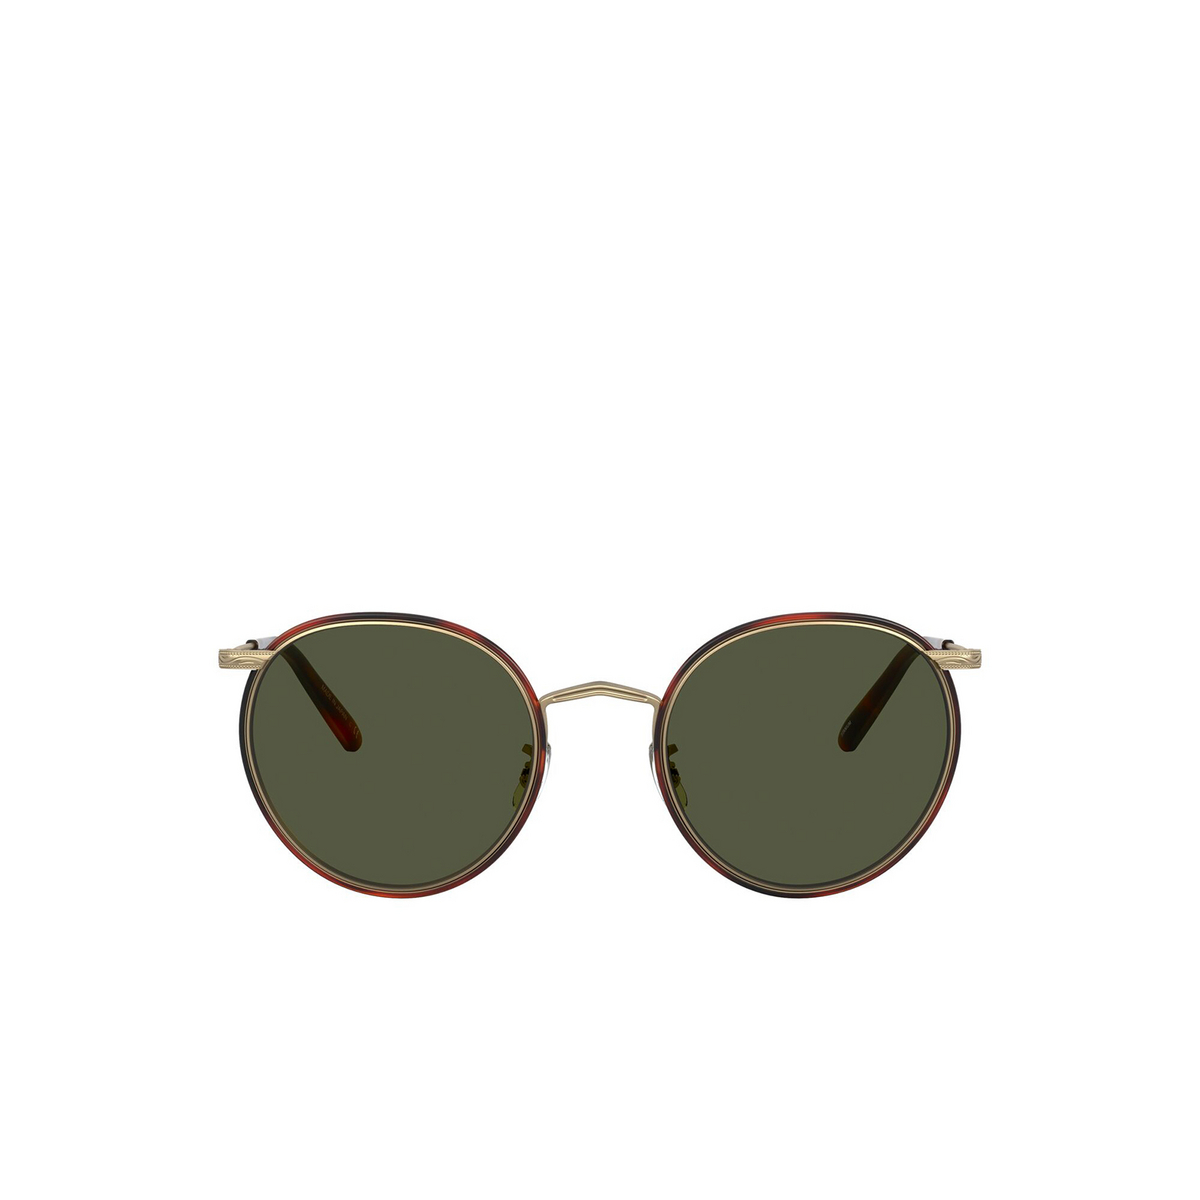 Oliver Peoples® Round Sunglasses: Casson OV1269ST color Antique Gold / Dark Mahogany 528452 - front view.